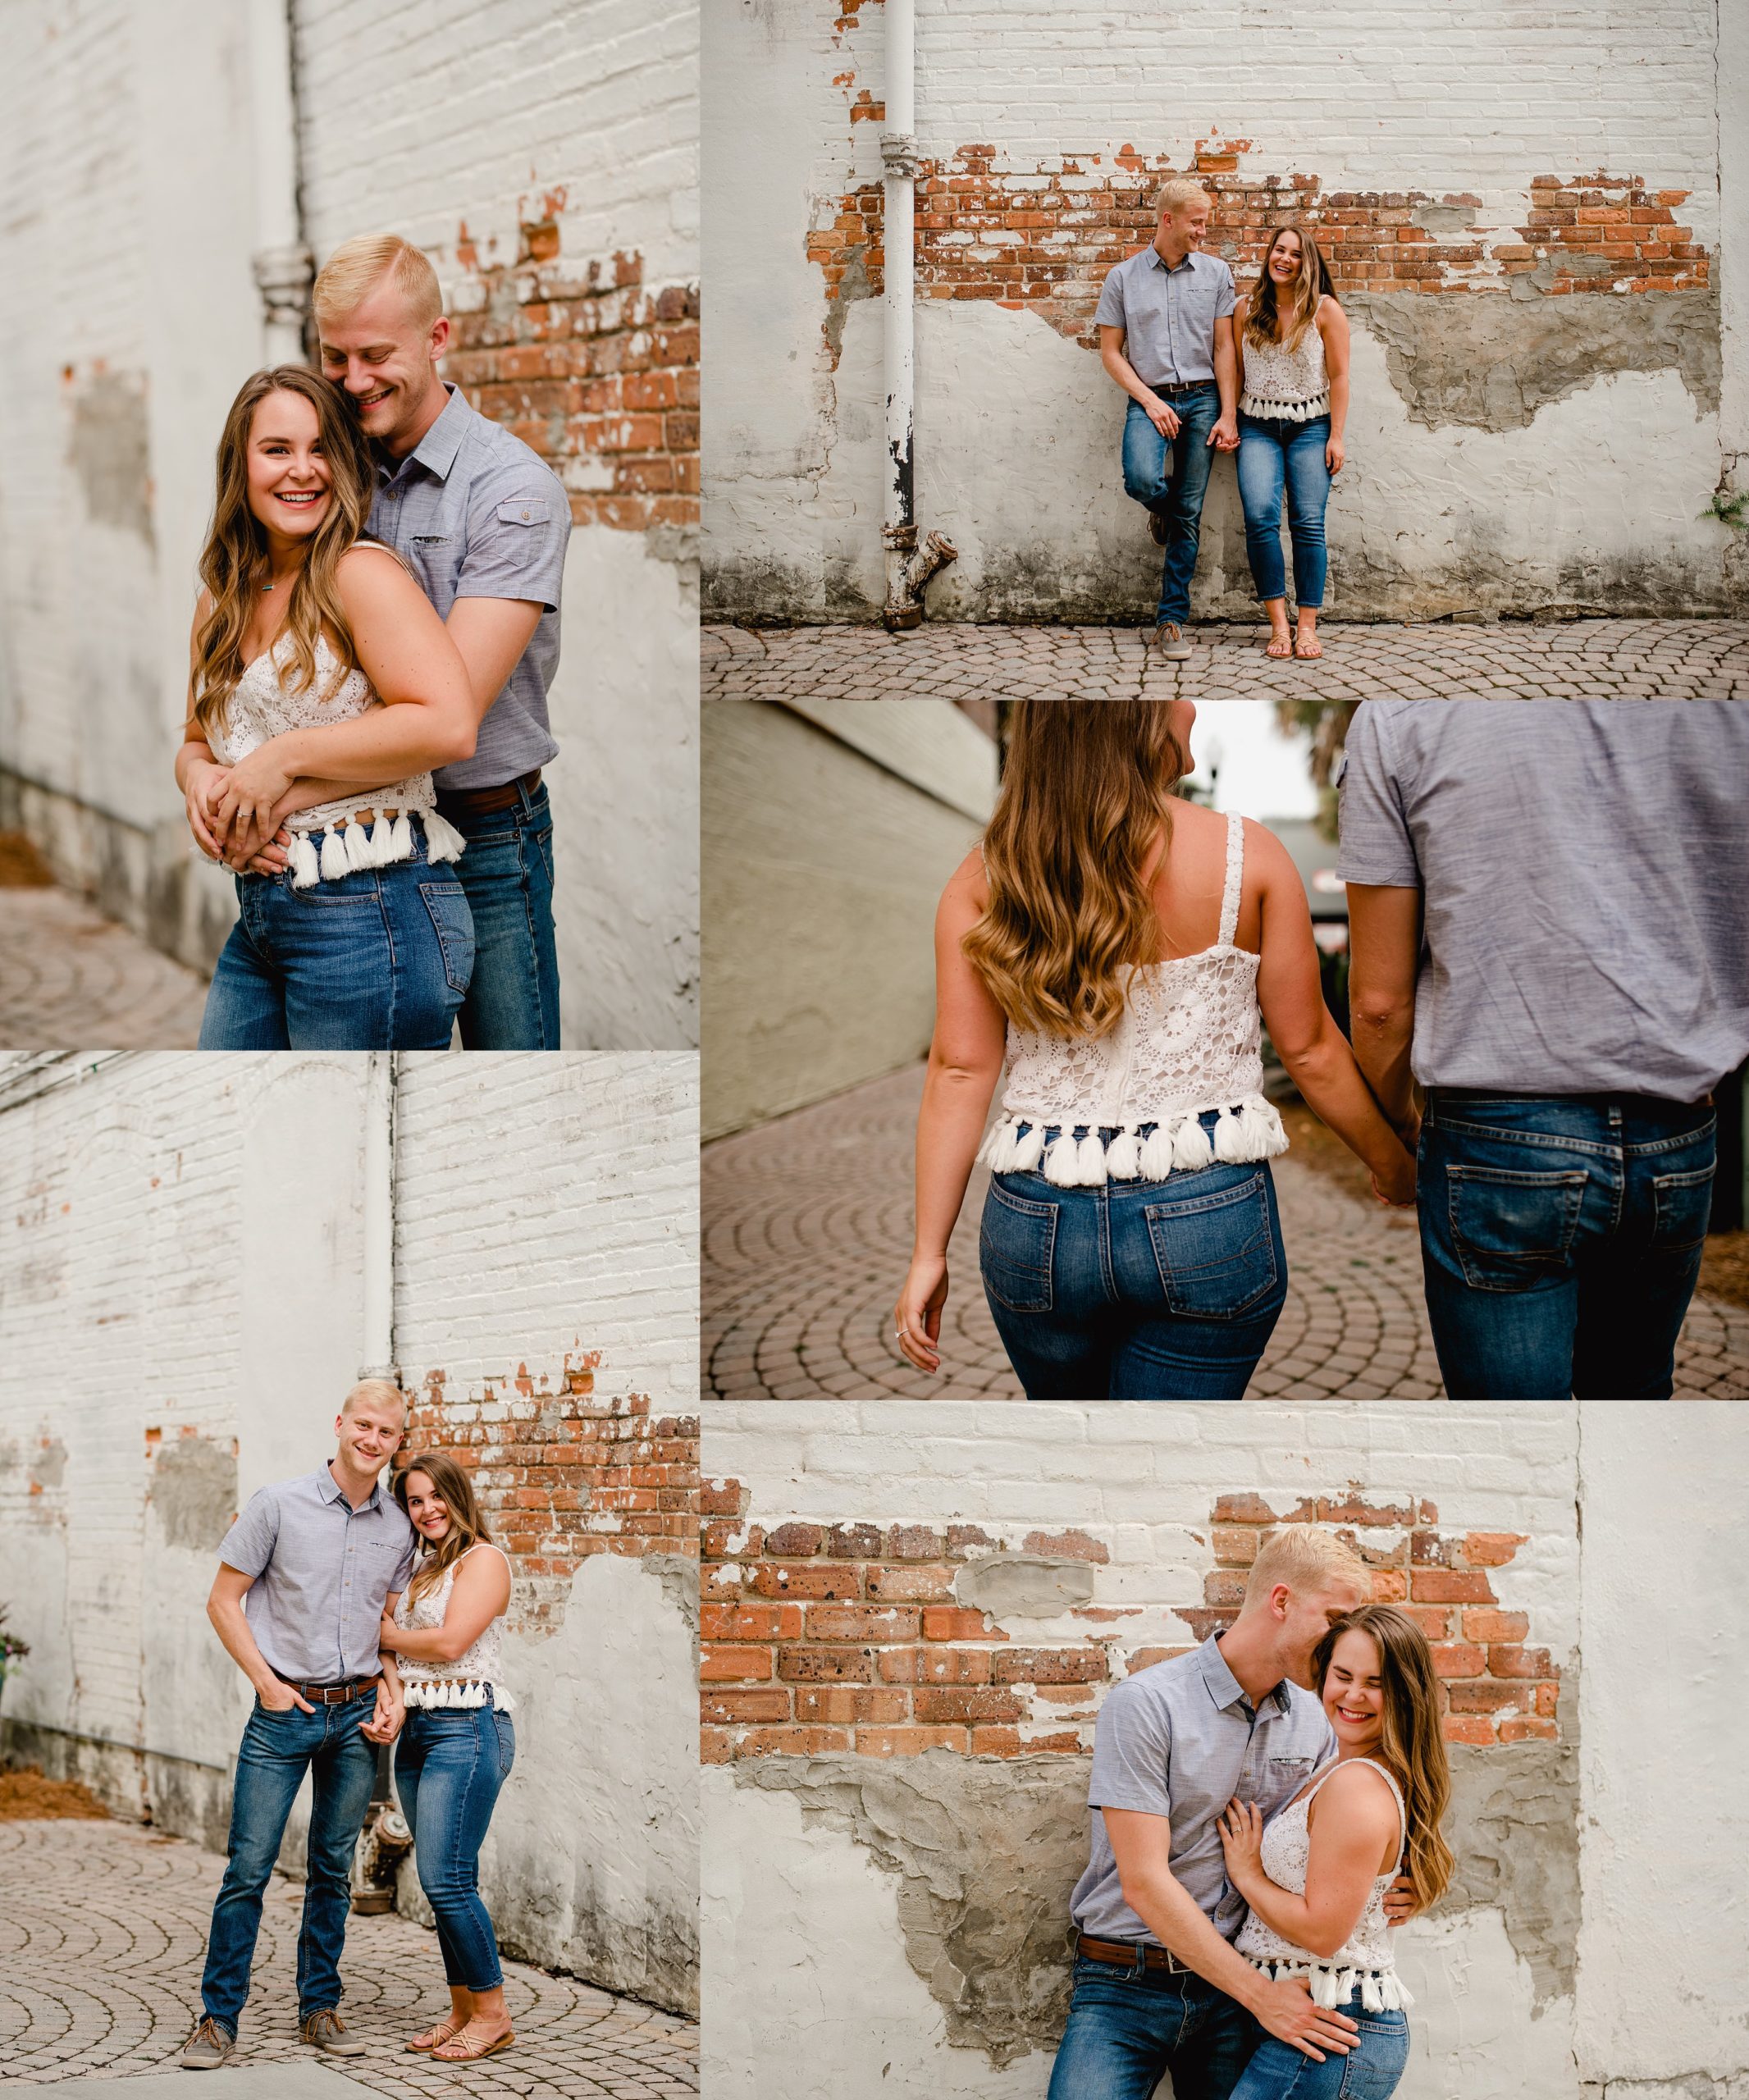 Fun poses for couples during their engagement session